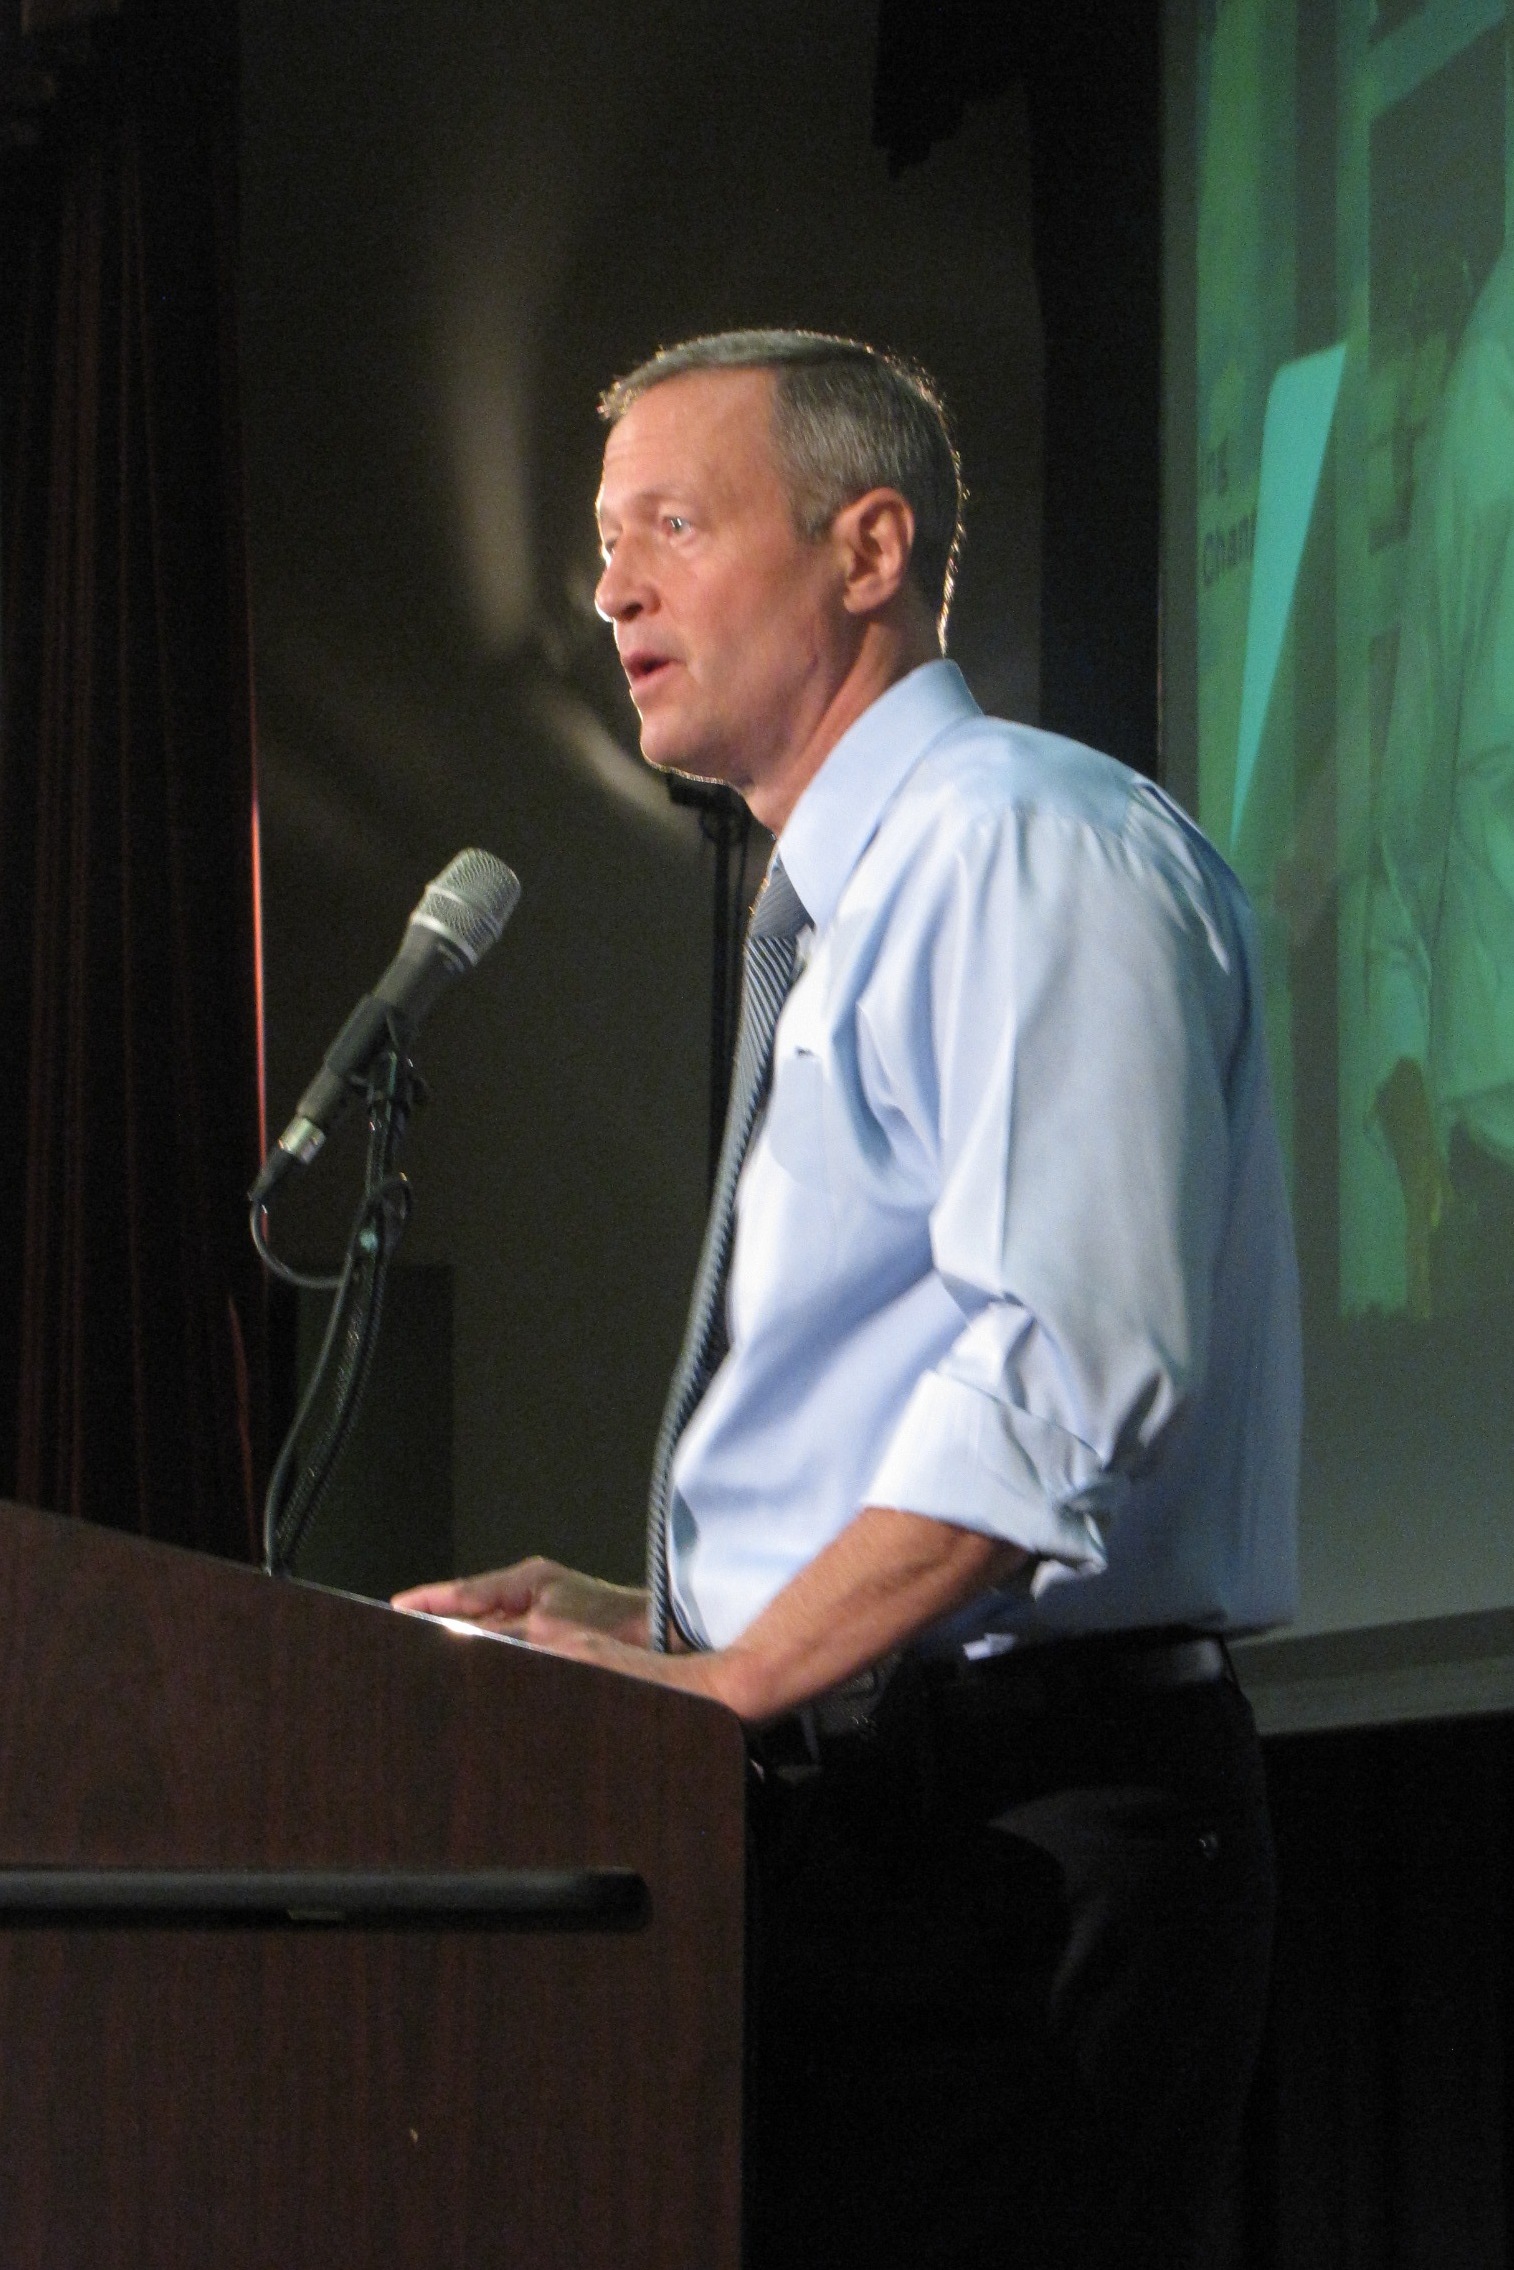 Governor Martin O'Malley at the Maryland Climate Change Summit